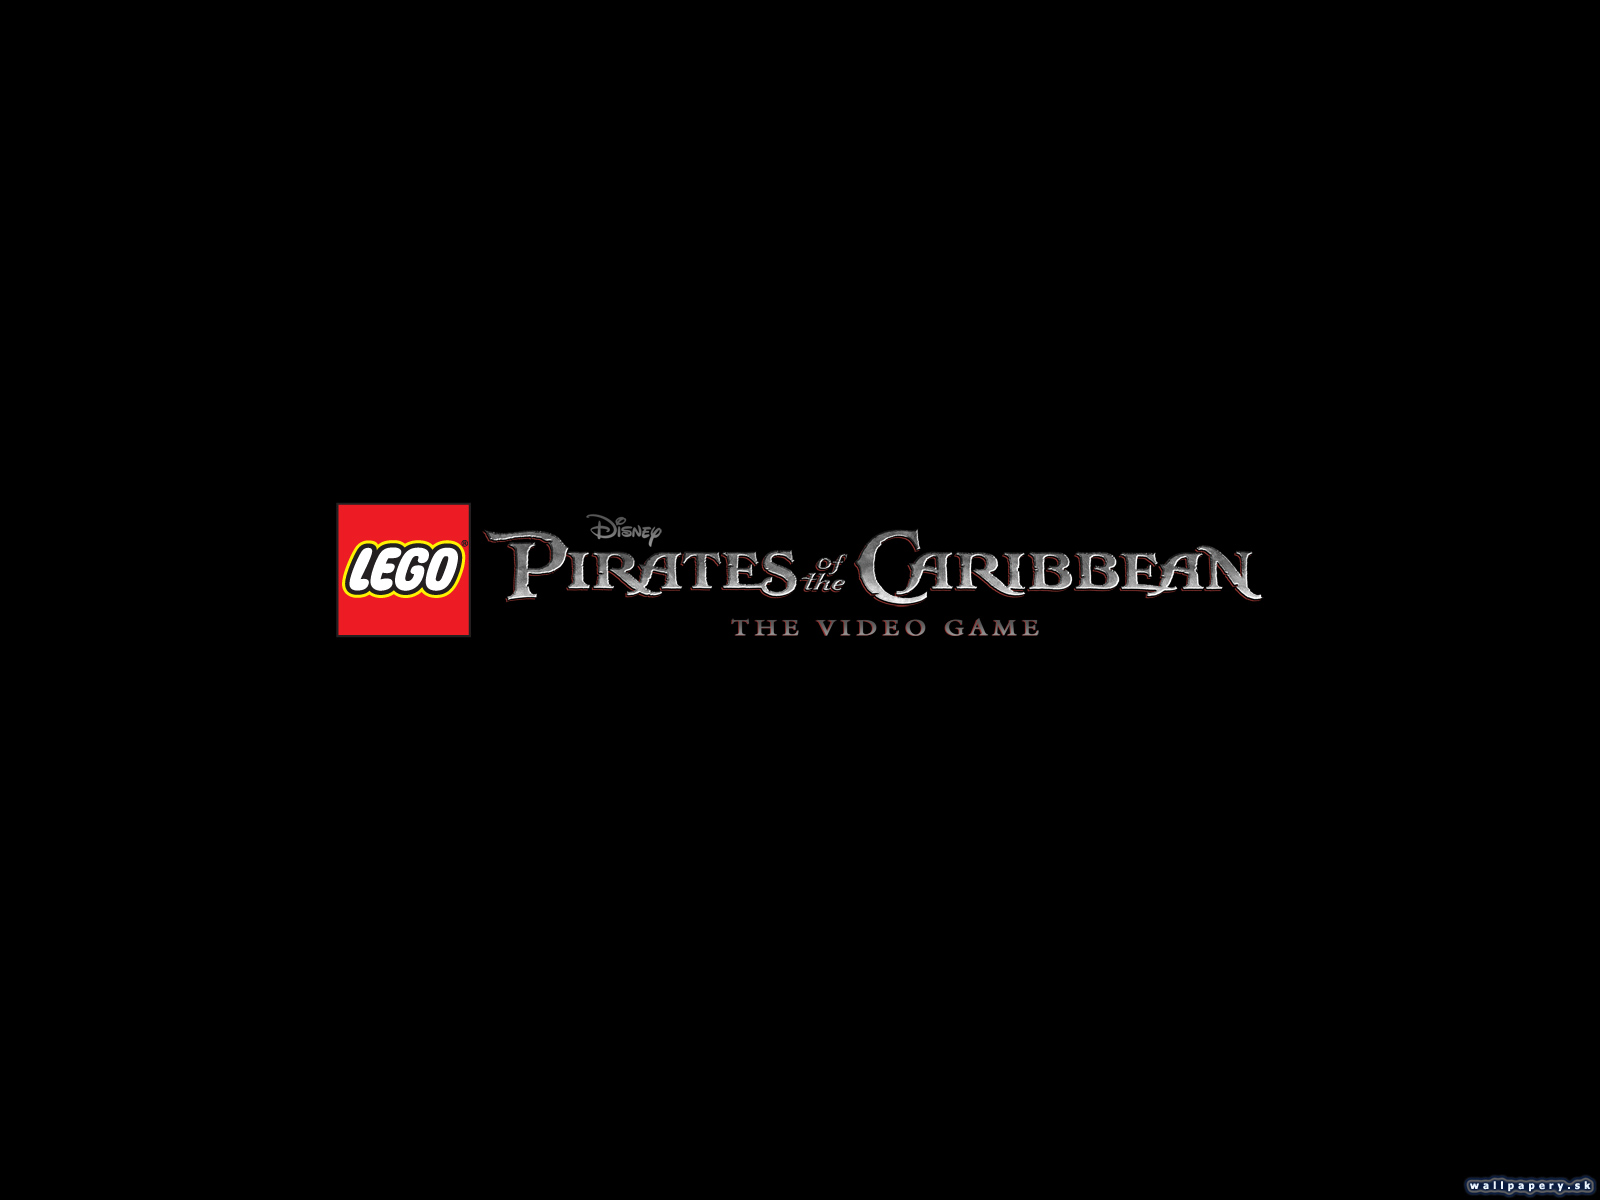 Lego Pirates of the Caribbean: The Video Game - wallpaper 8